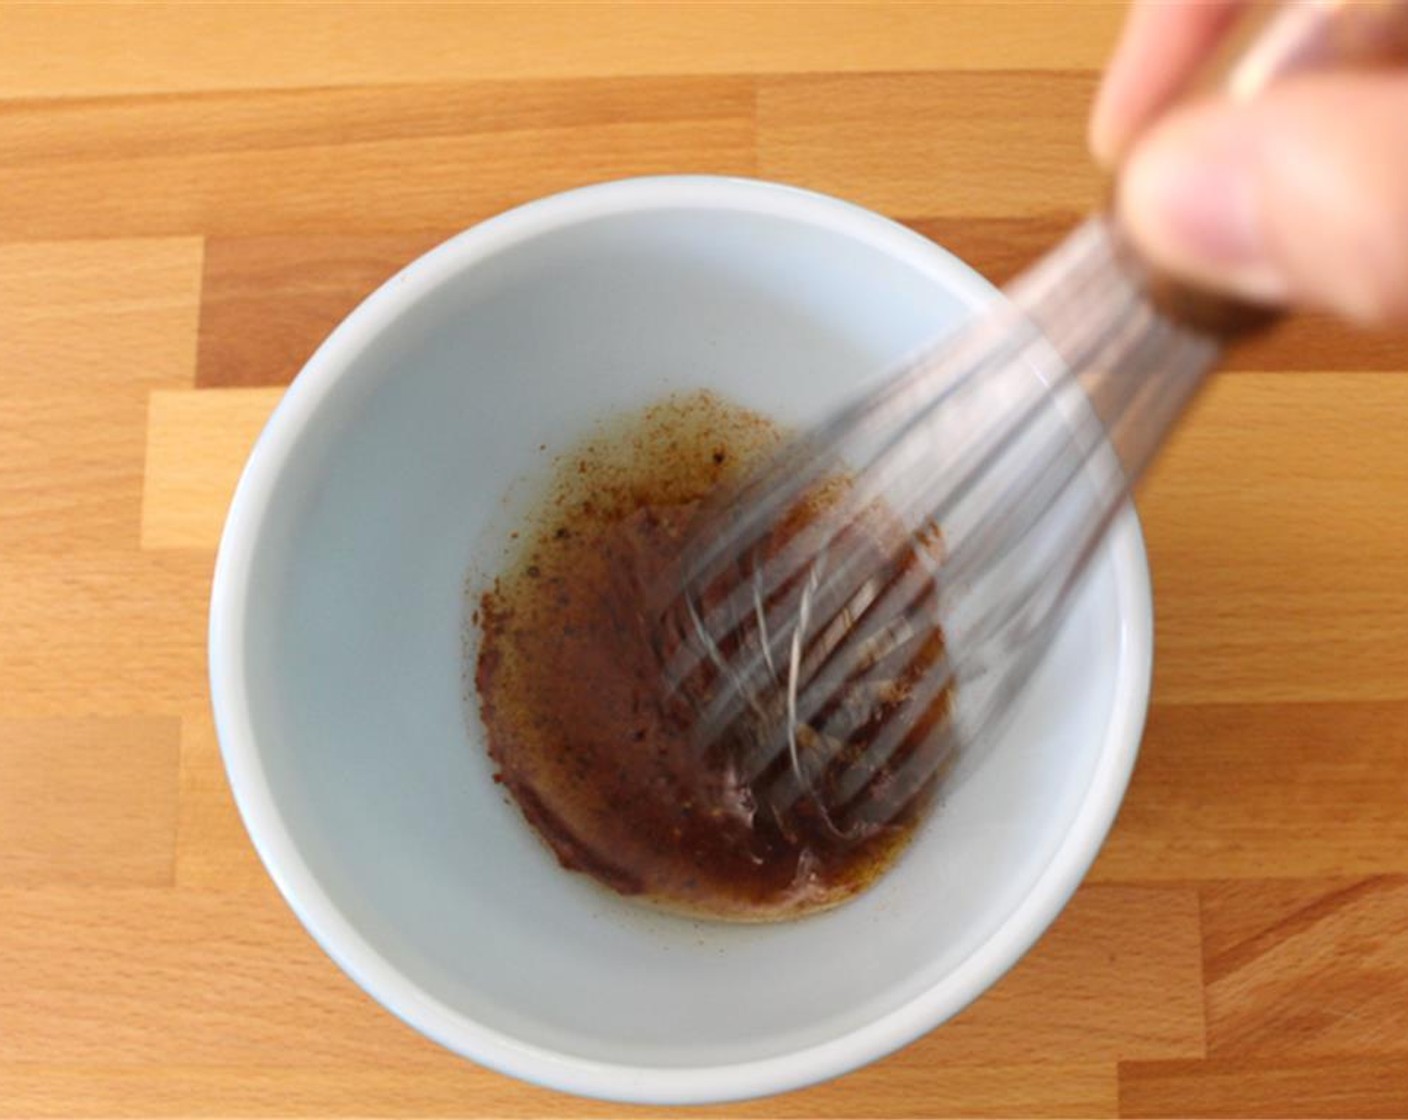 step 2 Stir together Olive Oil (2 Tbsp), Maple Syrup (2 Tbsp), and Cayenne Pepper (1/4 tsp) in a bowl.